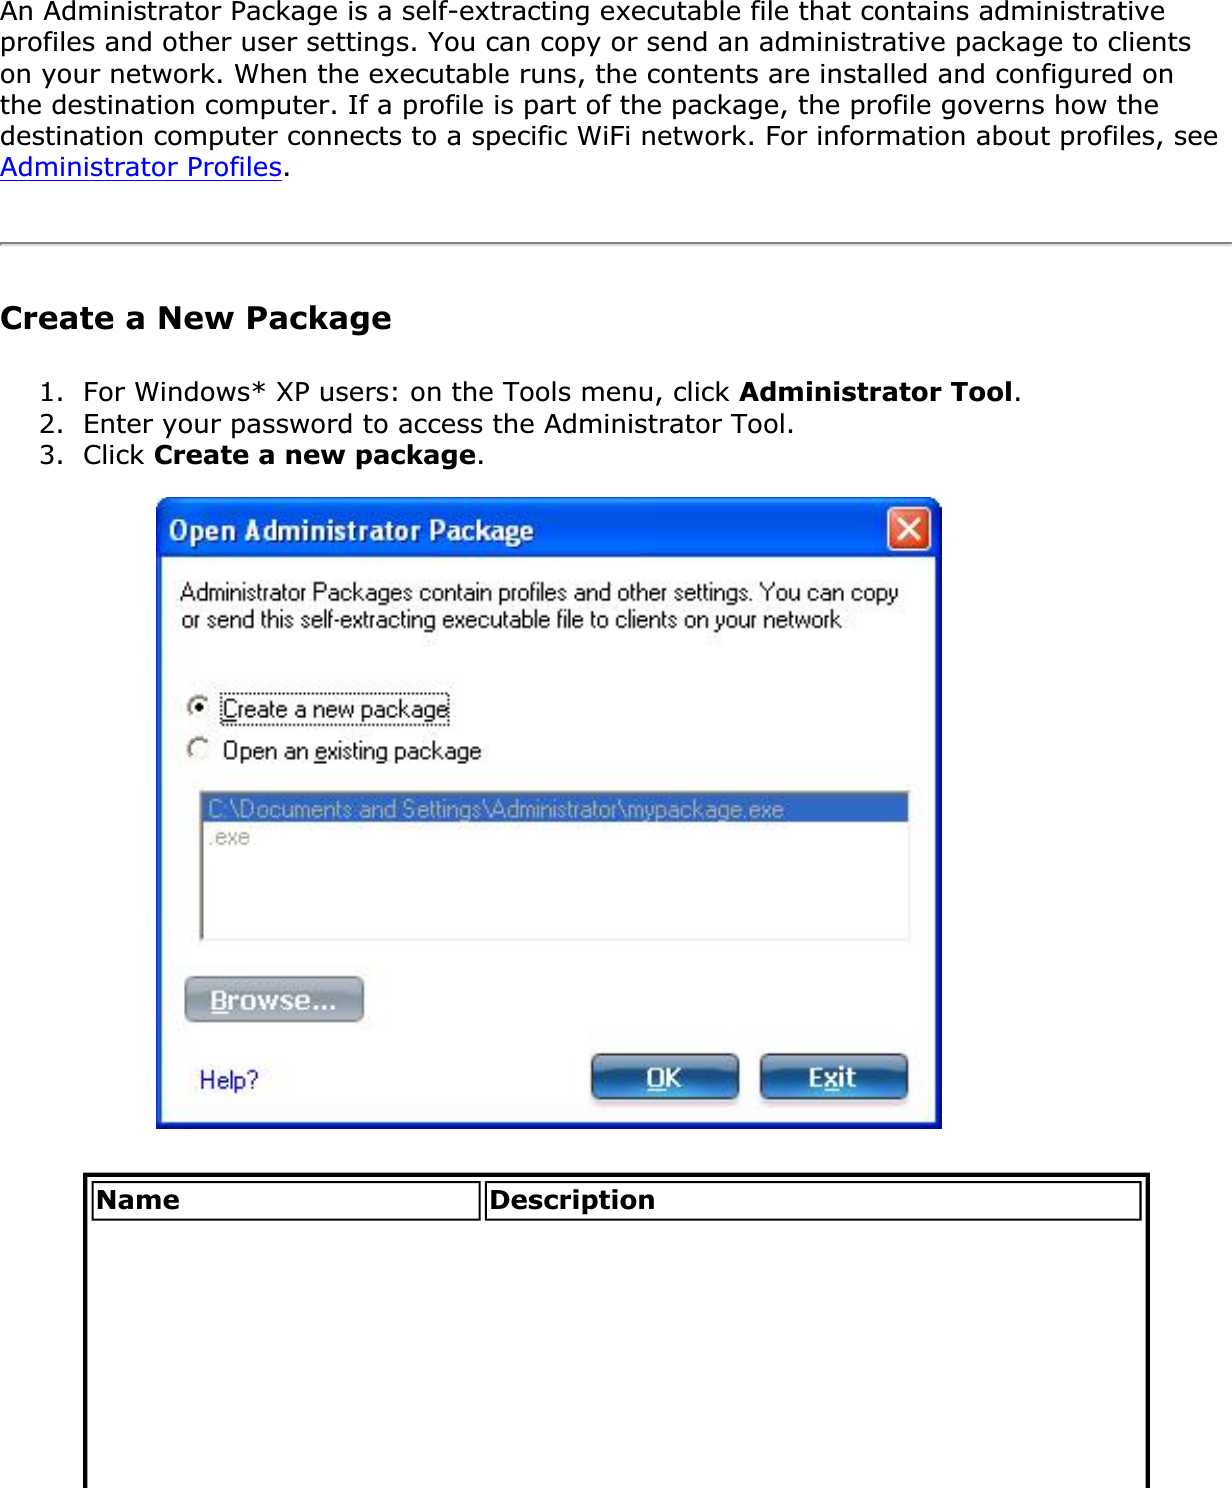 An Administrator Package is a self-extracting executable file that contains administrative profiles and other user settings. You can copy or send an administrative package to clients on your network. When the executable runs, the contents are installed and configured on the destination computer. If a profile is part of the package, the profile governs how the destination computer connects to a specific WiFi network. For information about profiles, see Administrator Profiles.Create a New Package1. For Windows* XP users: on the Tools menu, click Administrator Tool.2. Enter your password to access the Administrator Tool.3. Click Create a new package.Name Description